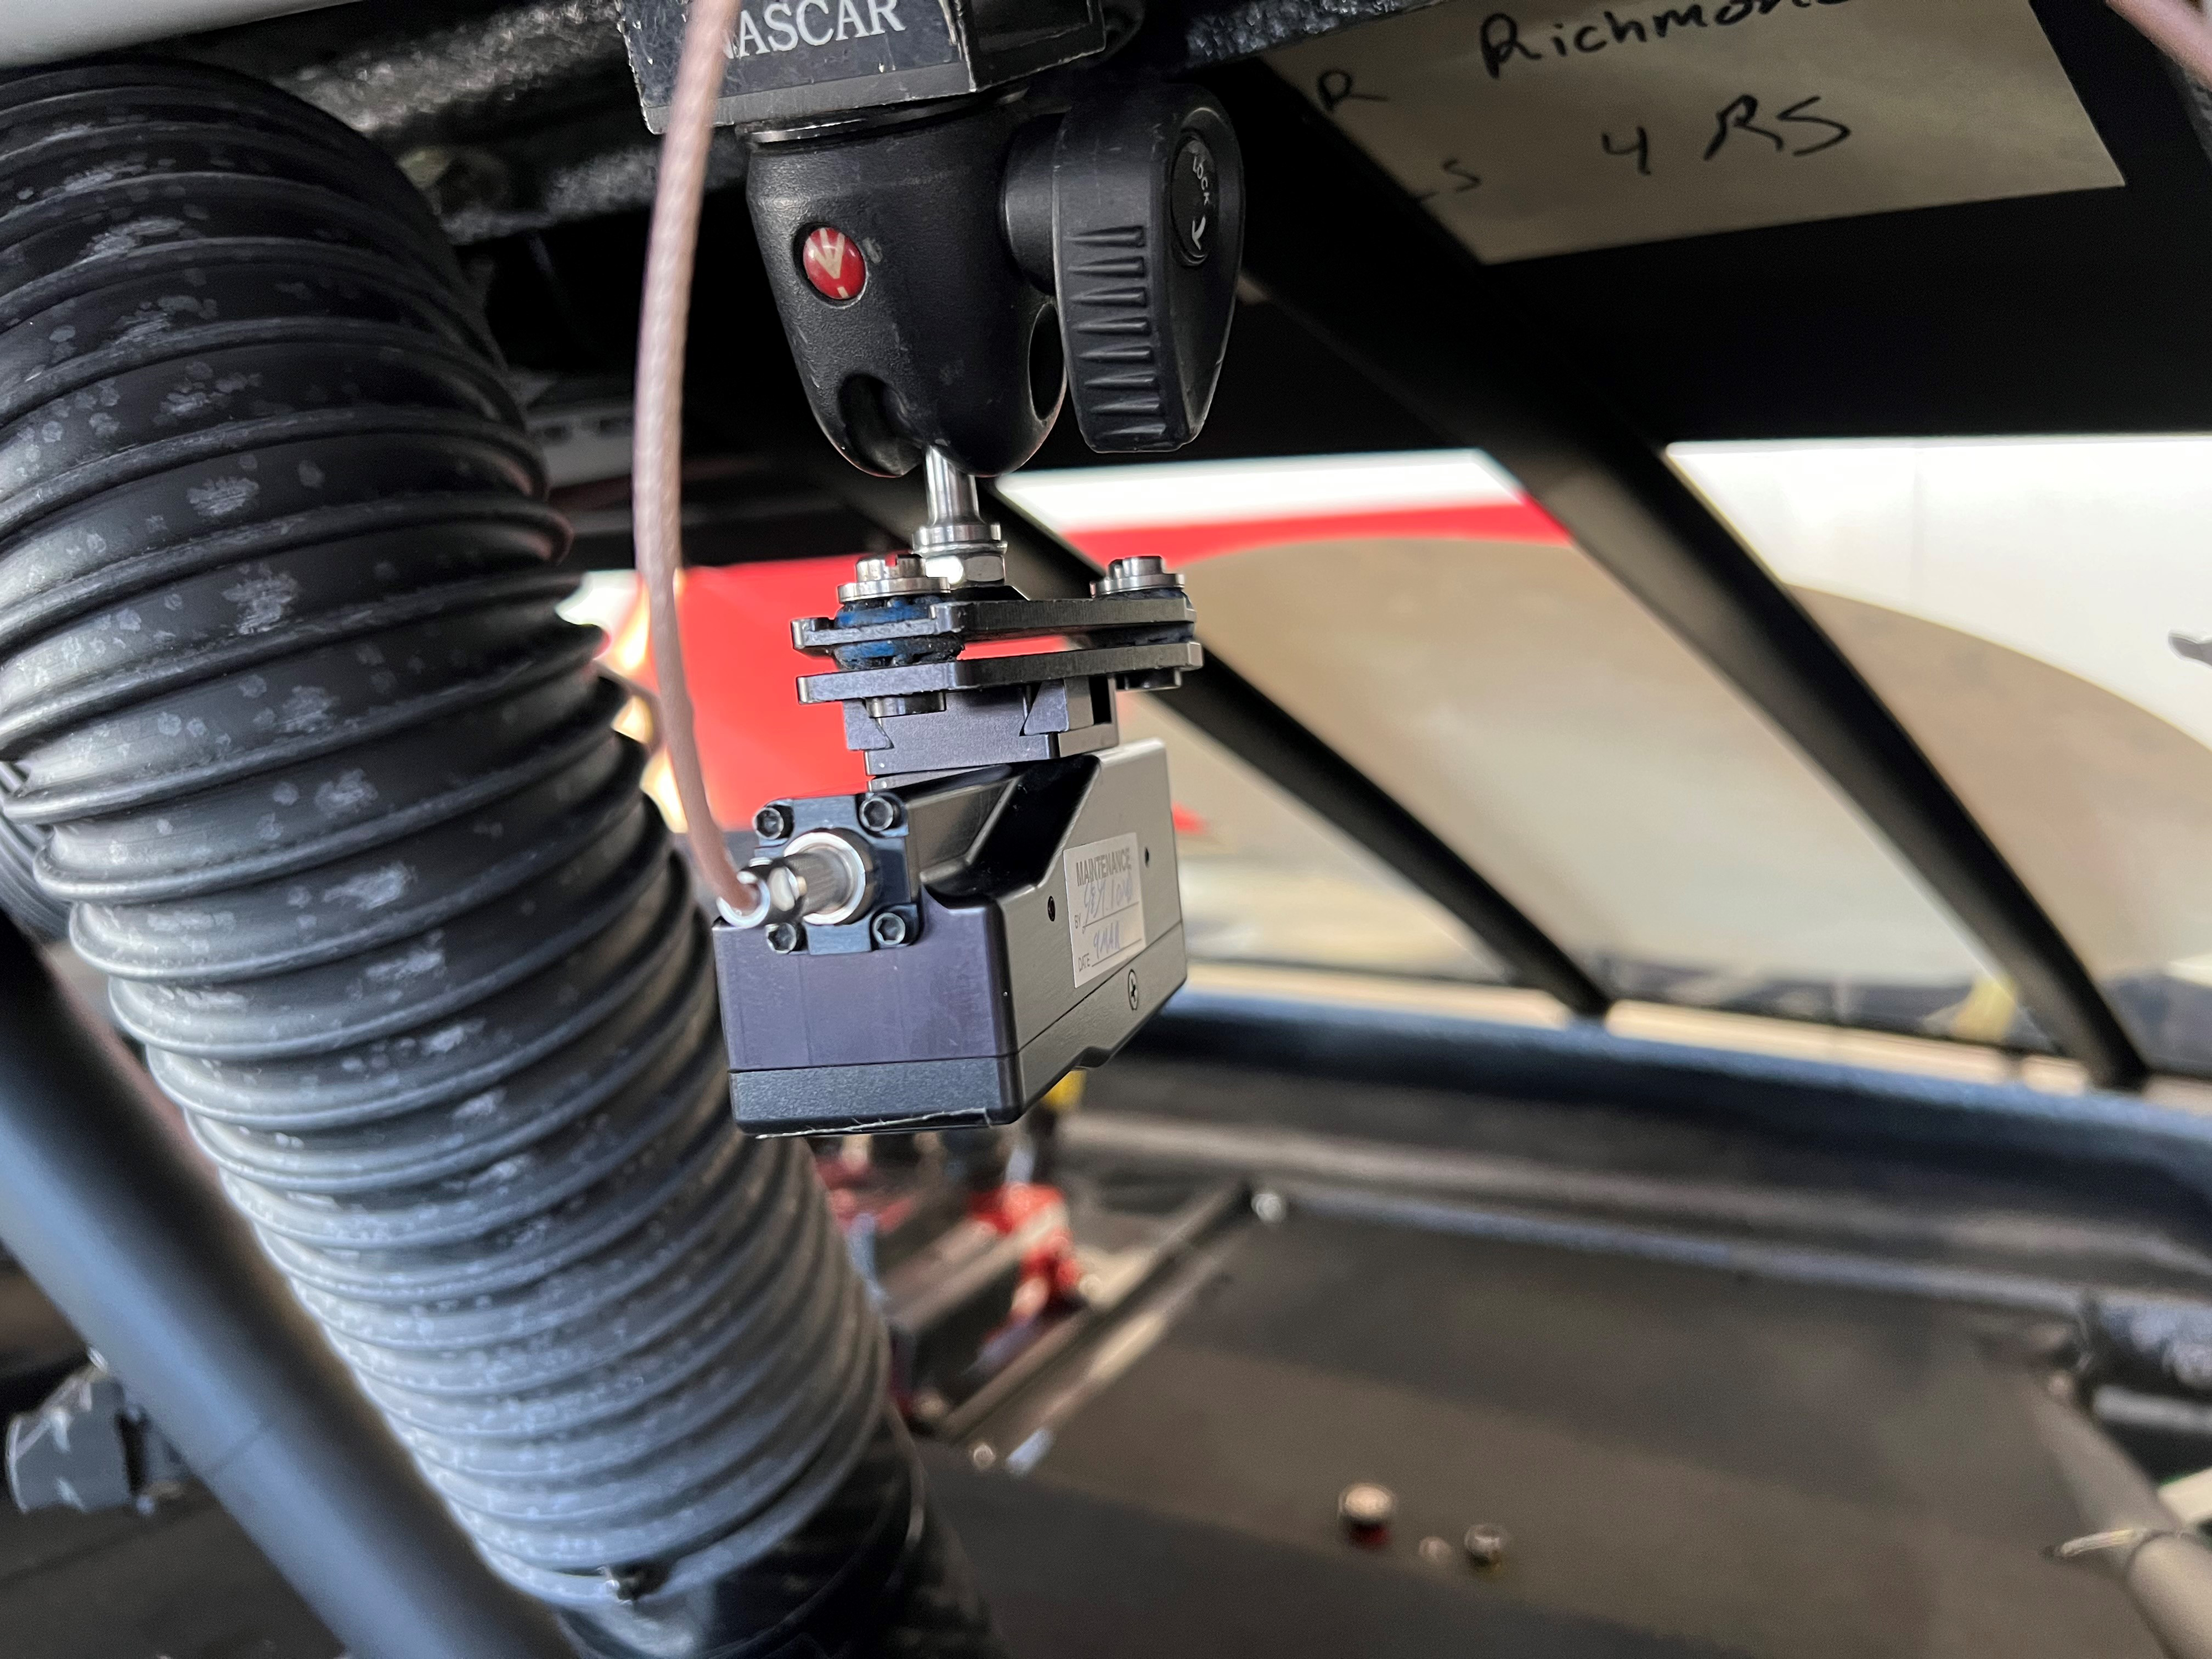 NASCAR To Offer Live In-Car Camera Feeds of Every Car at Sundays NASCAR Cup Series Playoff Race